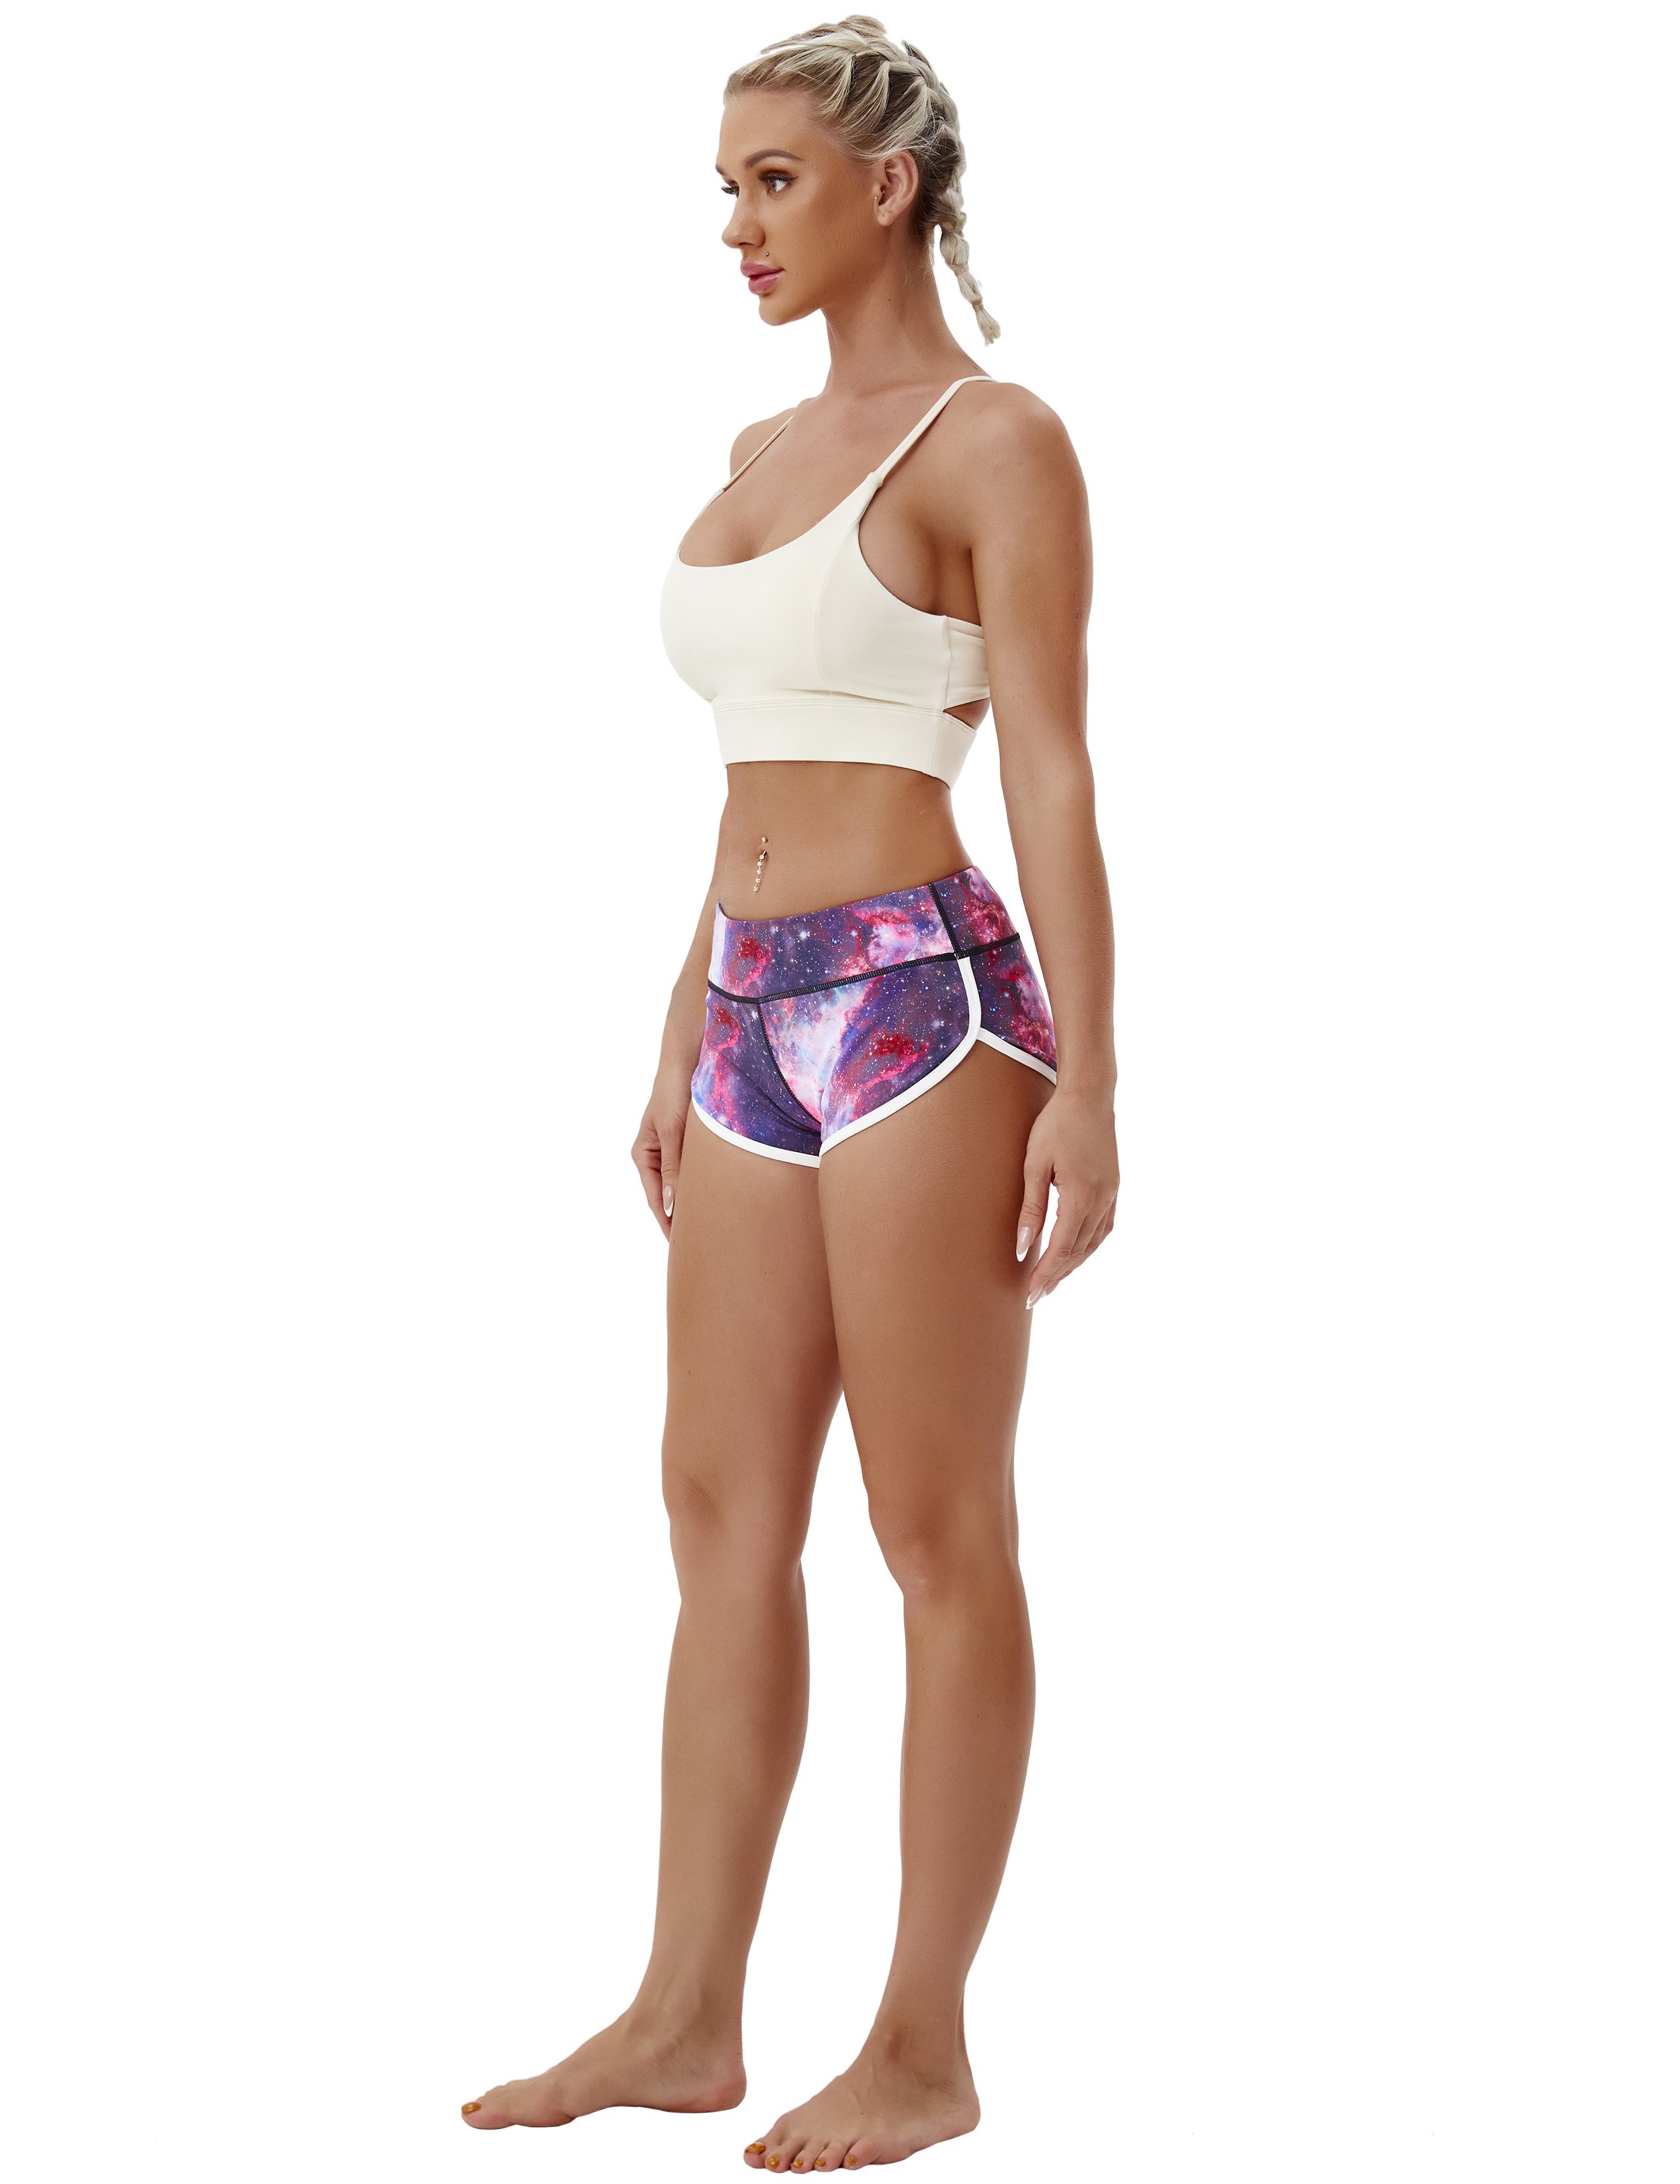 Printed Booty Golf Shorts galaxy Sleek, soft, smooth and totally comfortable: our newest sexy style is here. Softest-ever fabric High elasticity High density 4-way stretch Fabric doesn't attract lint easily No see-through Moisture-wicking Machine wash 78% Polyester, 22% Spandex